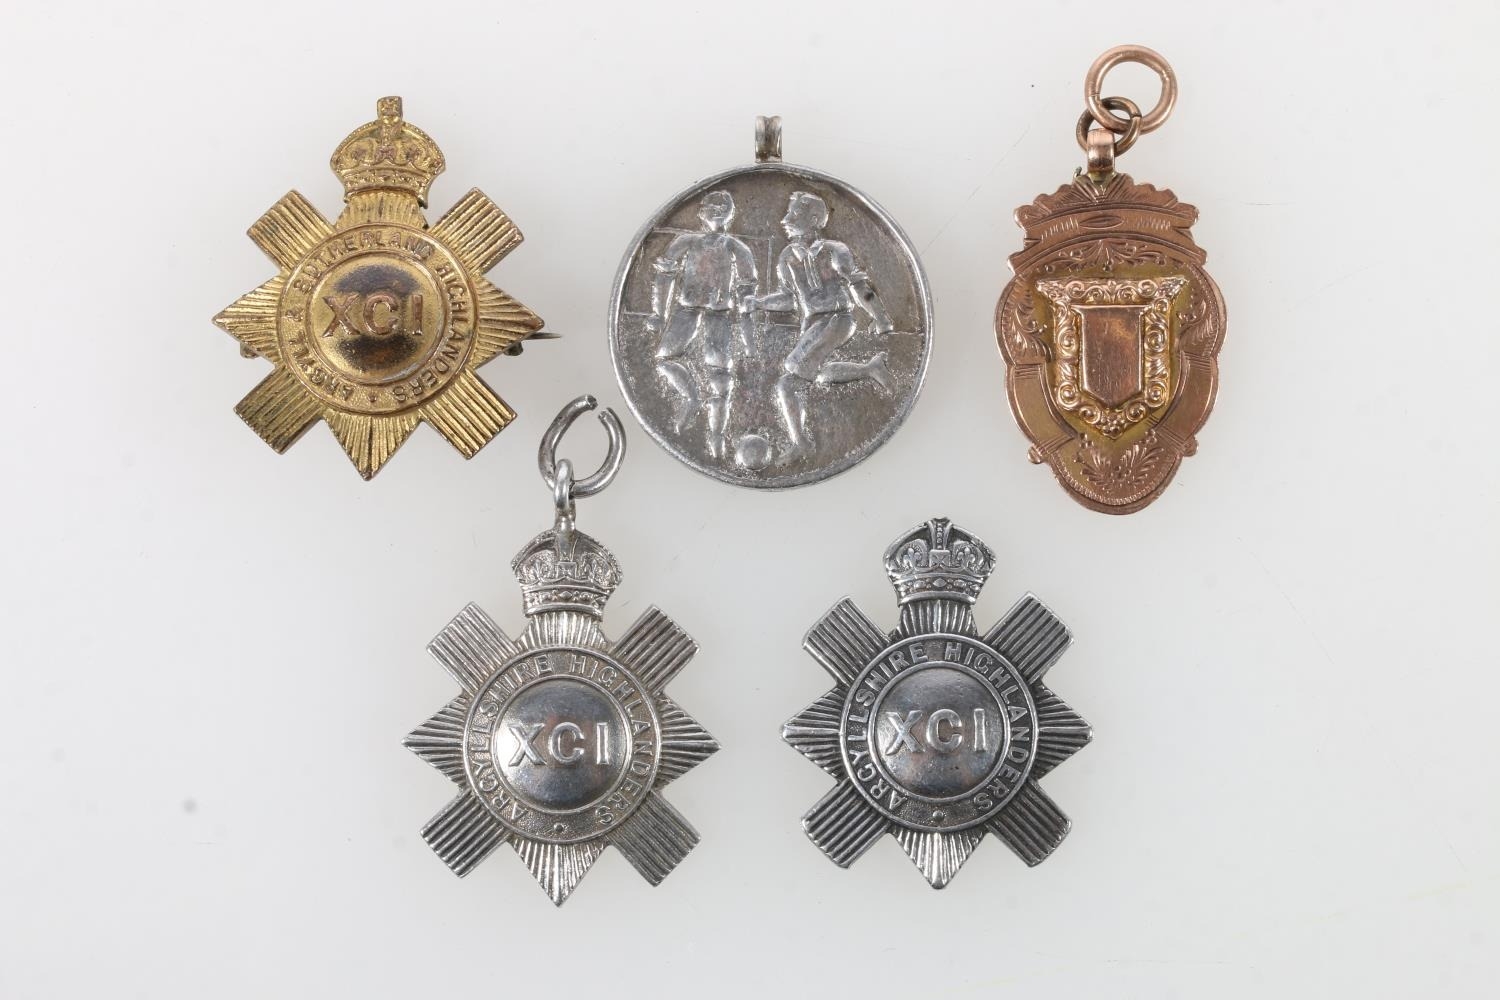 Football medals of Sergeant T Dryburgh of the 91st Regiment Argyllshire Highlanders to include a